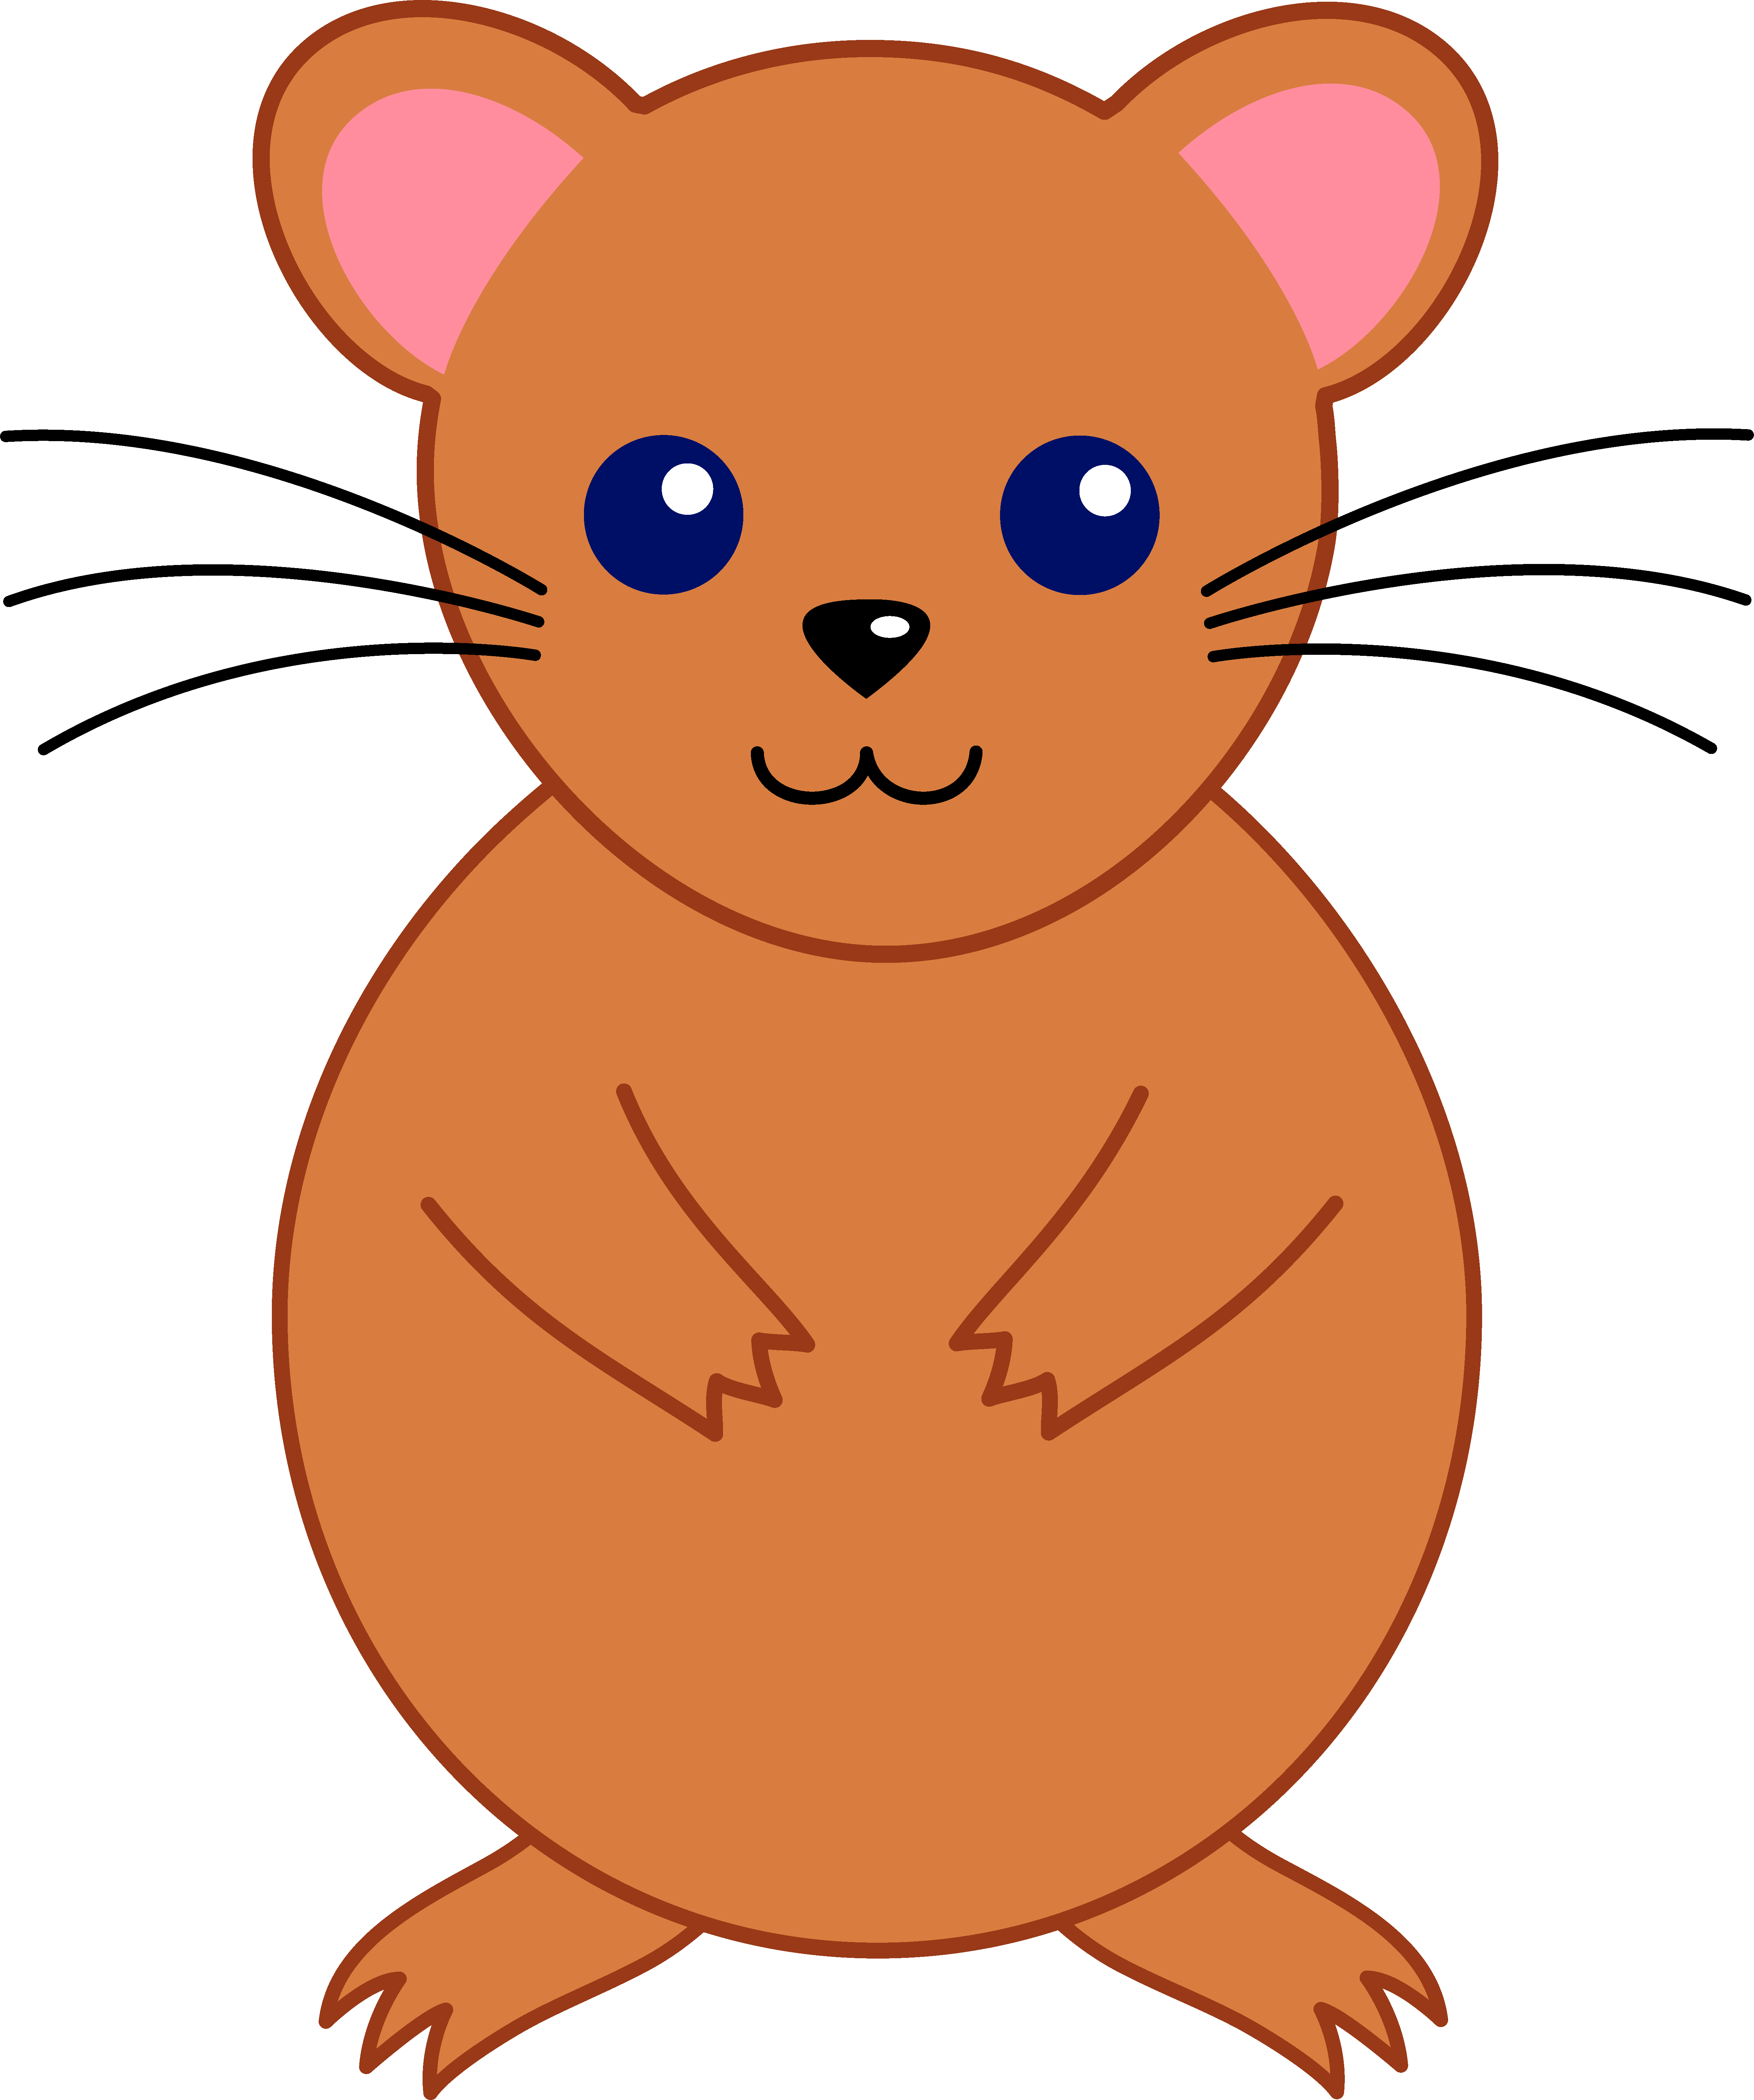 Hamster cliparts